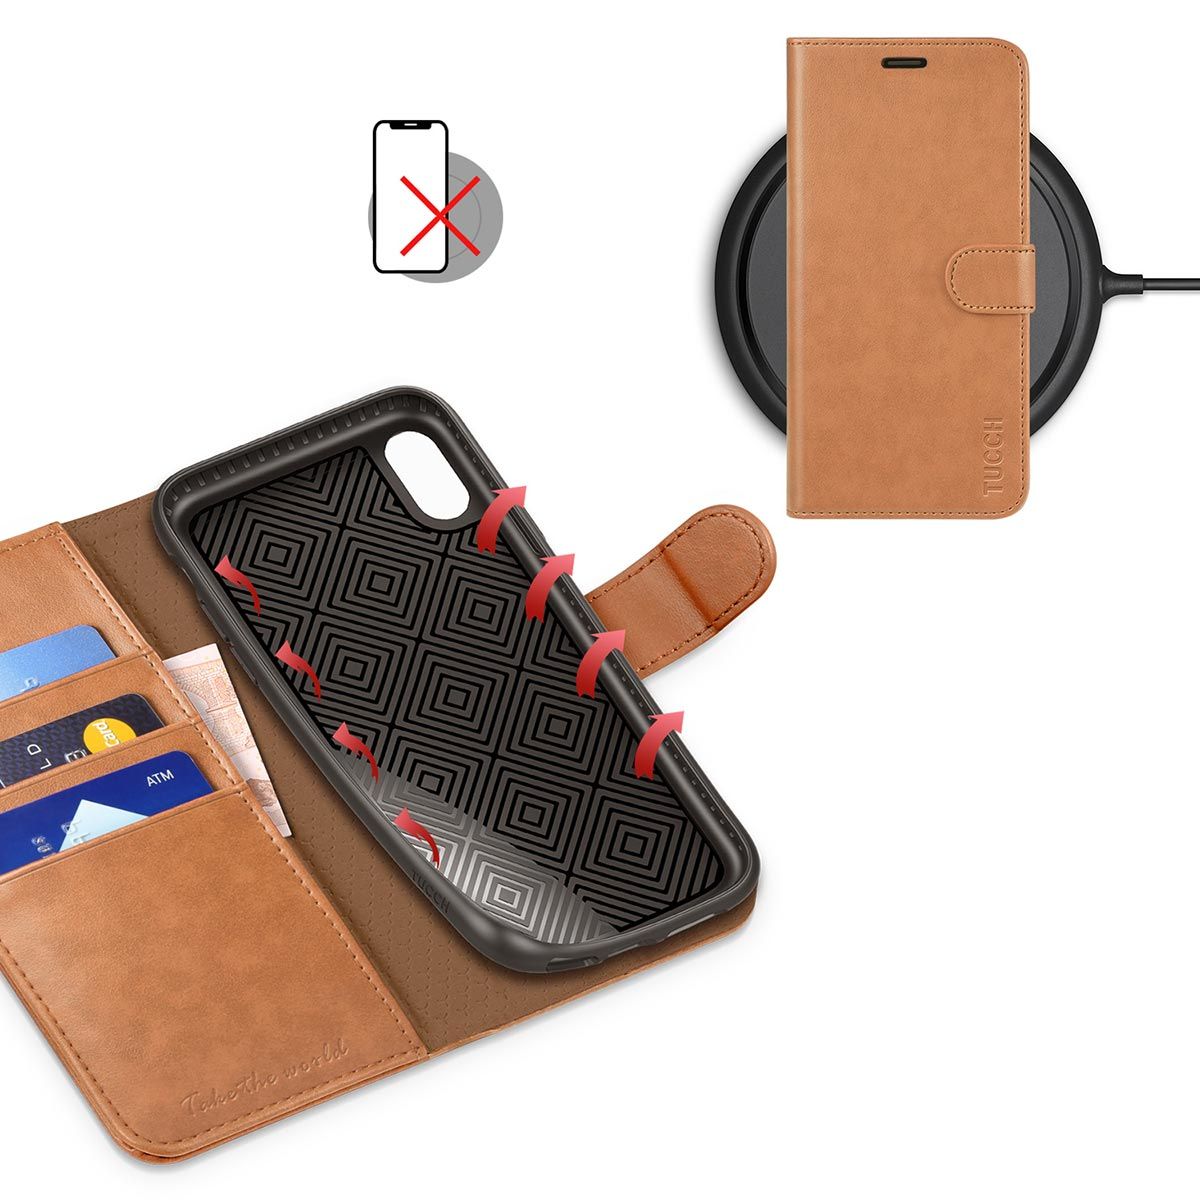 TUCCH iPhone XR Wallet Case - iPhone XR Leather Cover Light Brown